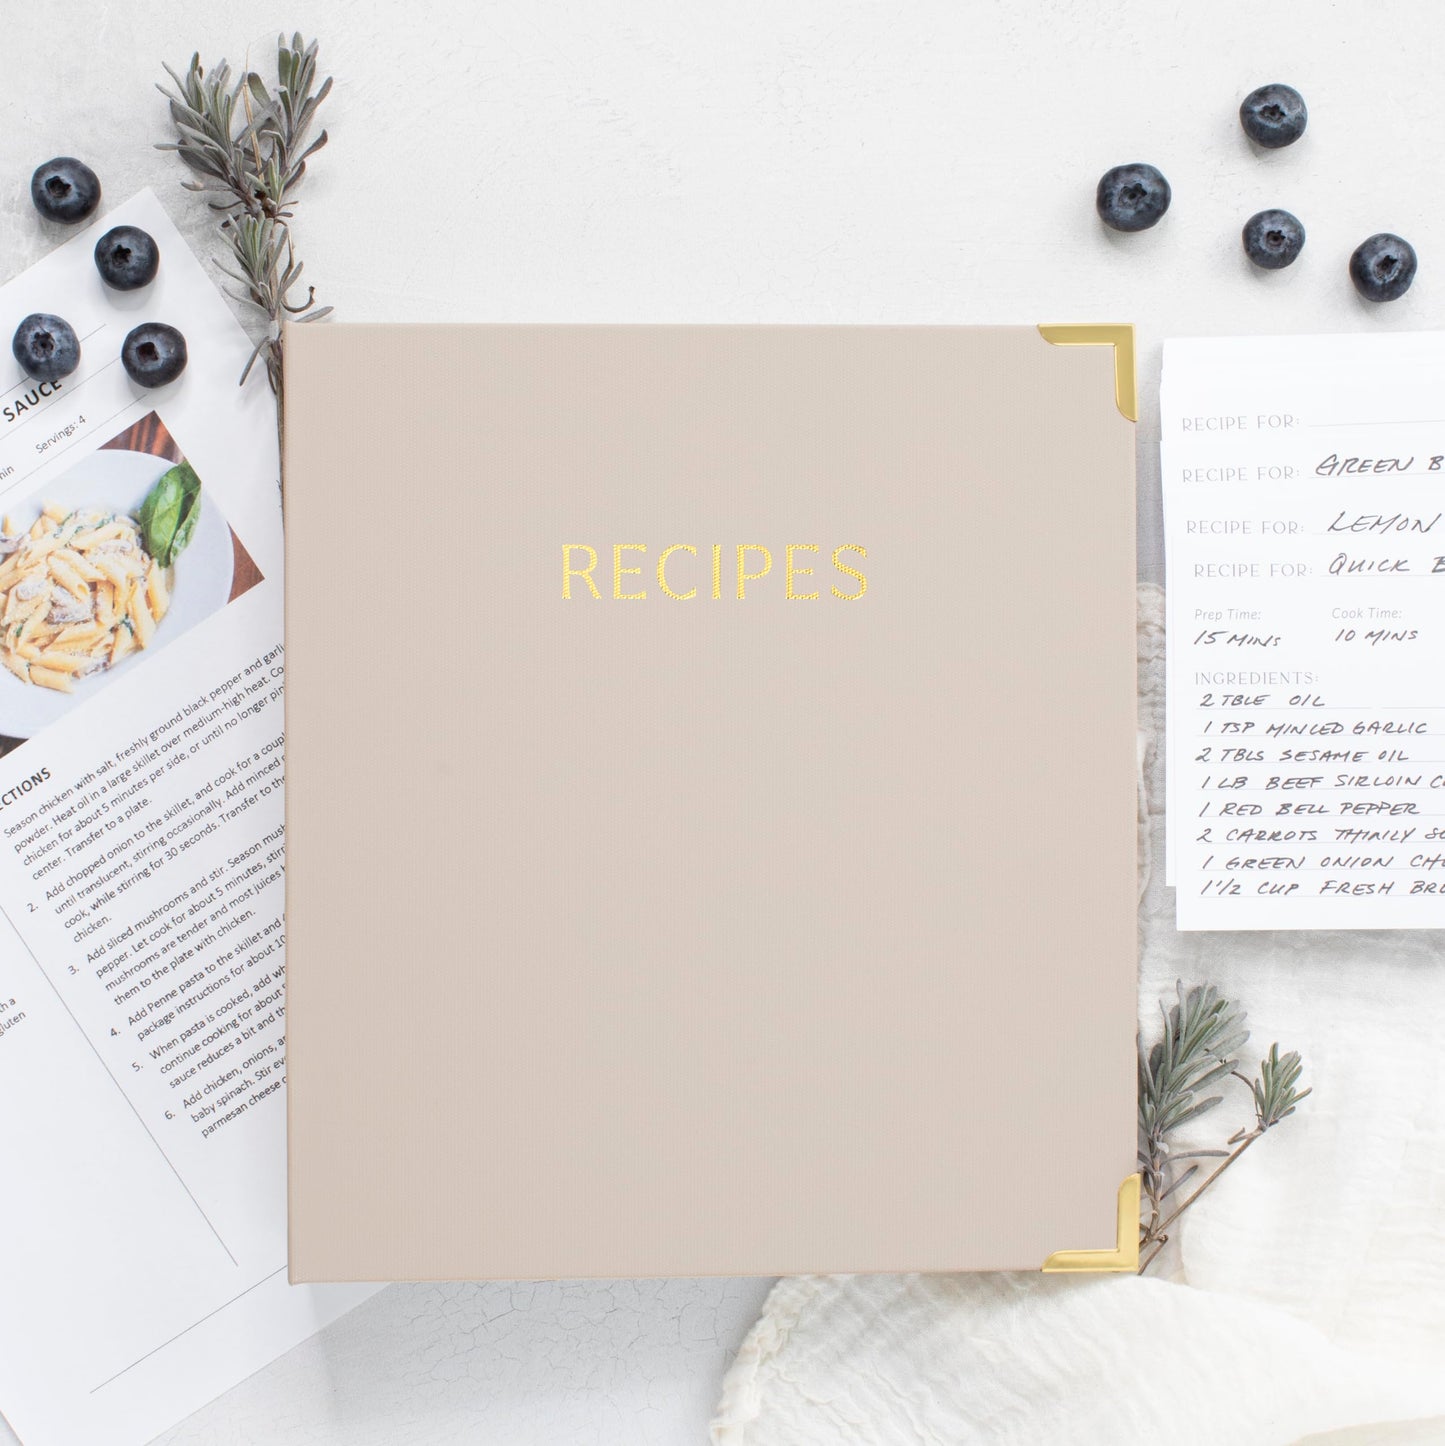 Aesthetic Recipe Binder with Waterproof Cover - The Perfect Recipe Book with Plastic Sleeves to Write in Your Own Recipes - Quality Blank Cookbook Binder to Organize Your Recipes - Recipe Cards incl.